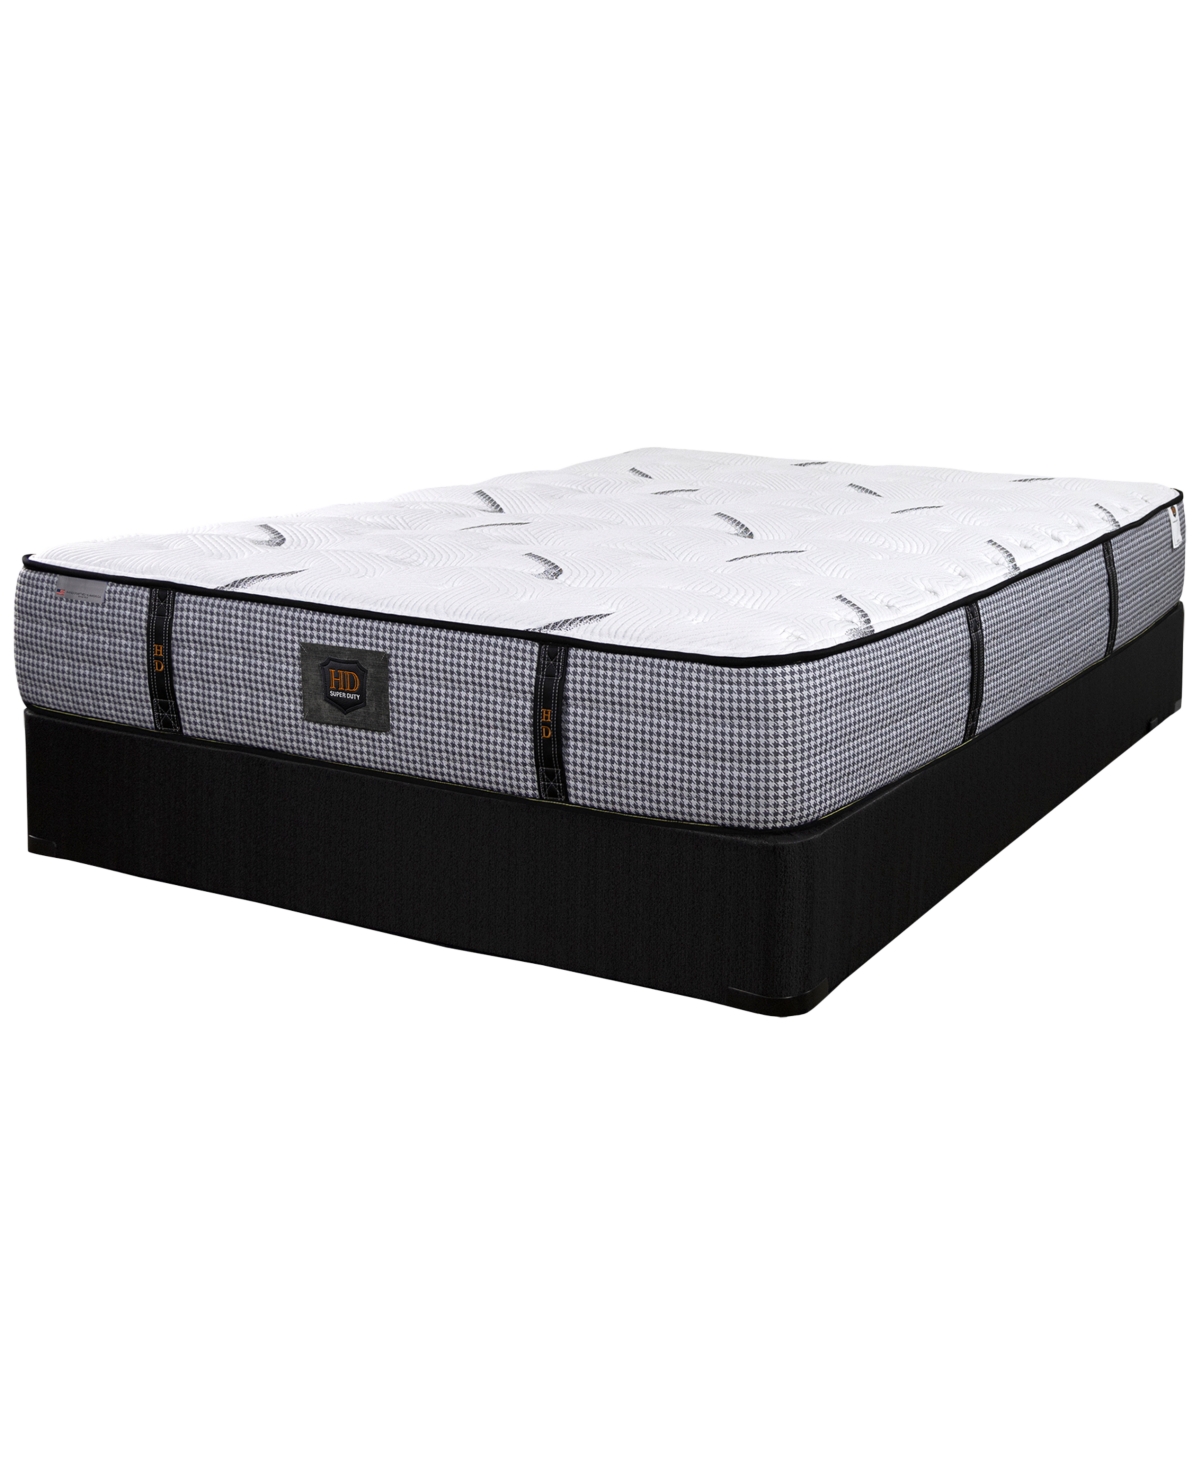 Paramount Hd Granite 11" Extra Firm Mattress Set In No Color